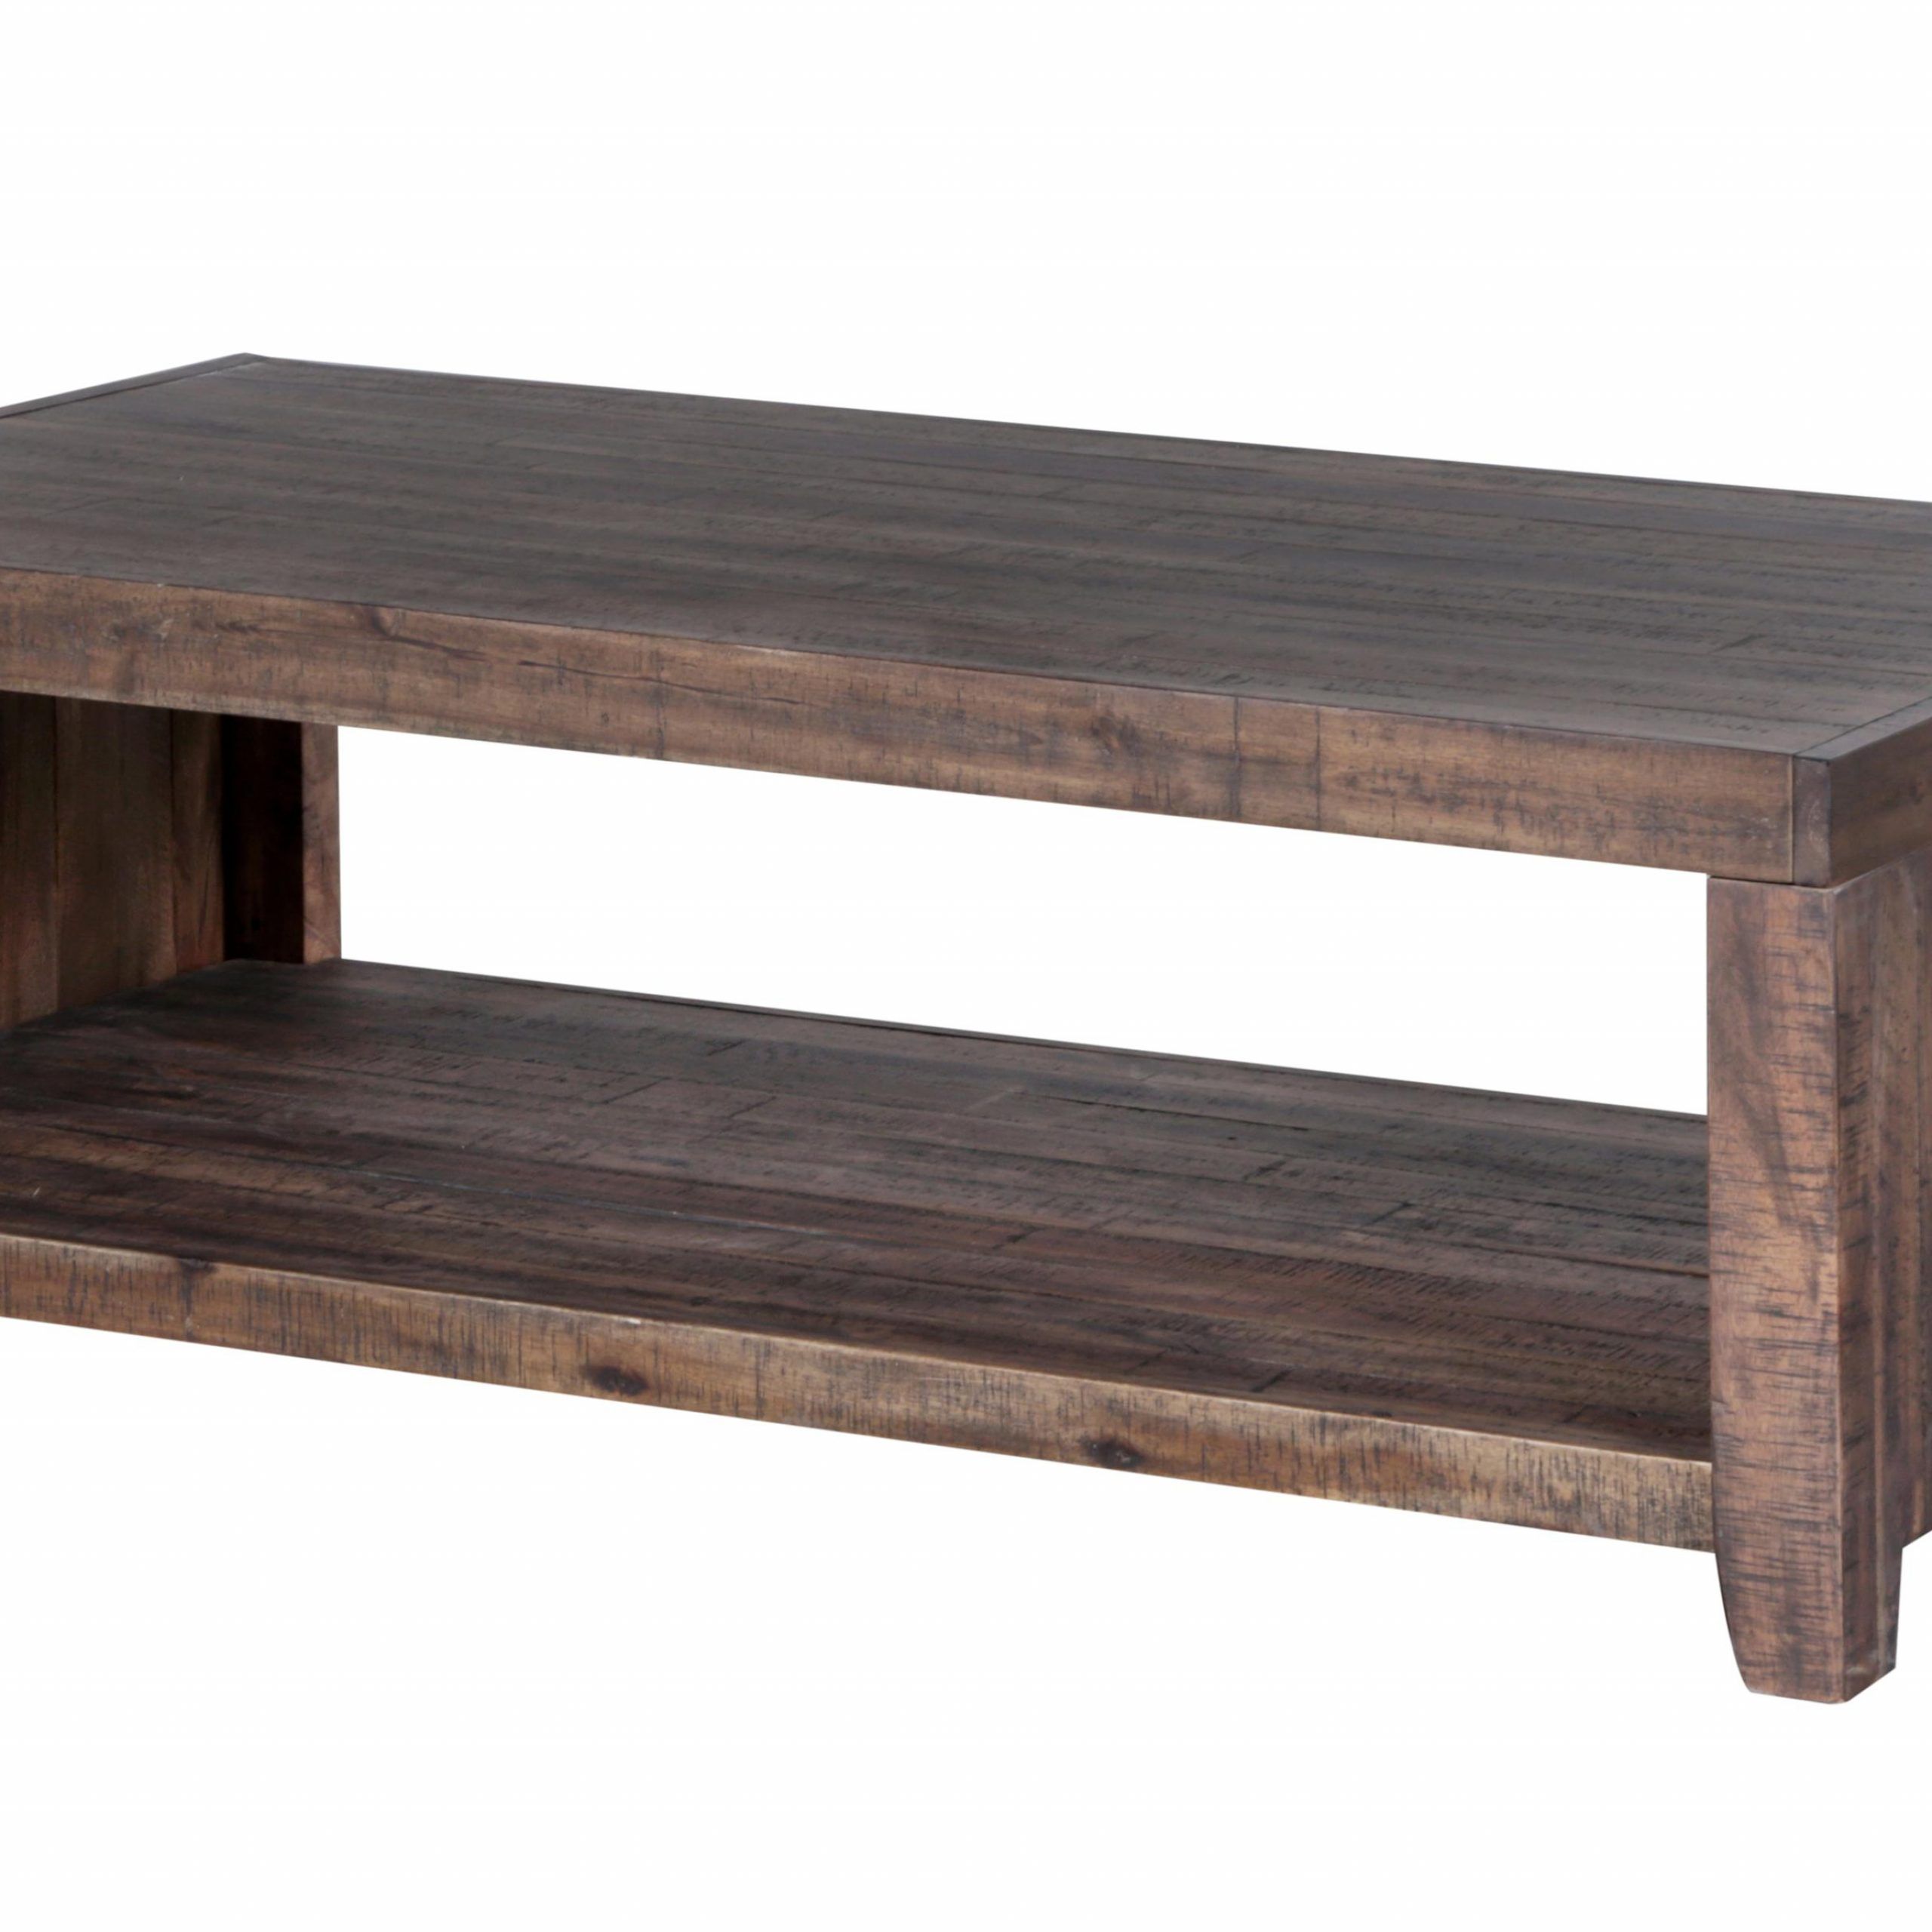 Magnussen Home Caitlyn Rustic Rectangular Cocktail Table Throughout Rustic Barnside Cocktail Tables (View 15 of 15)